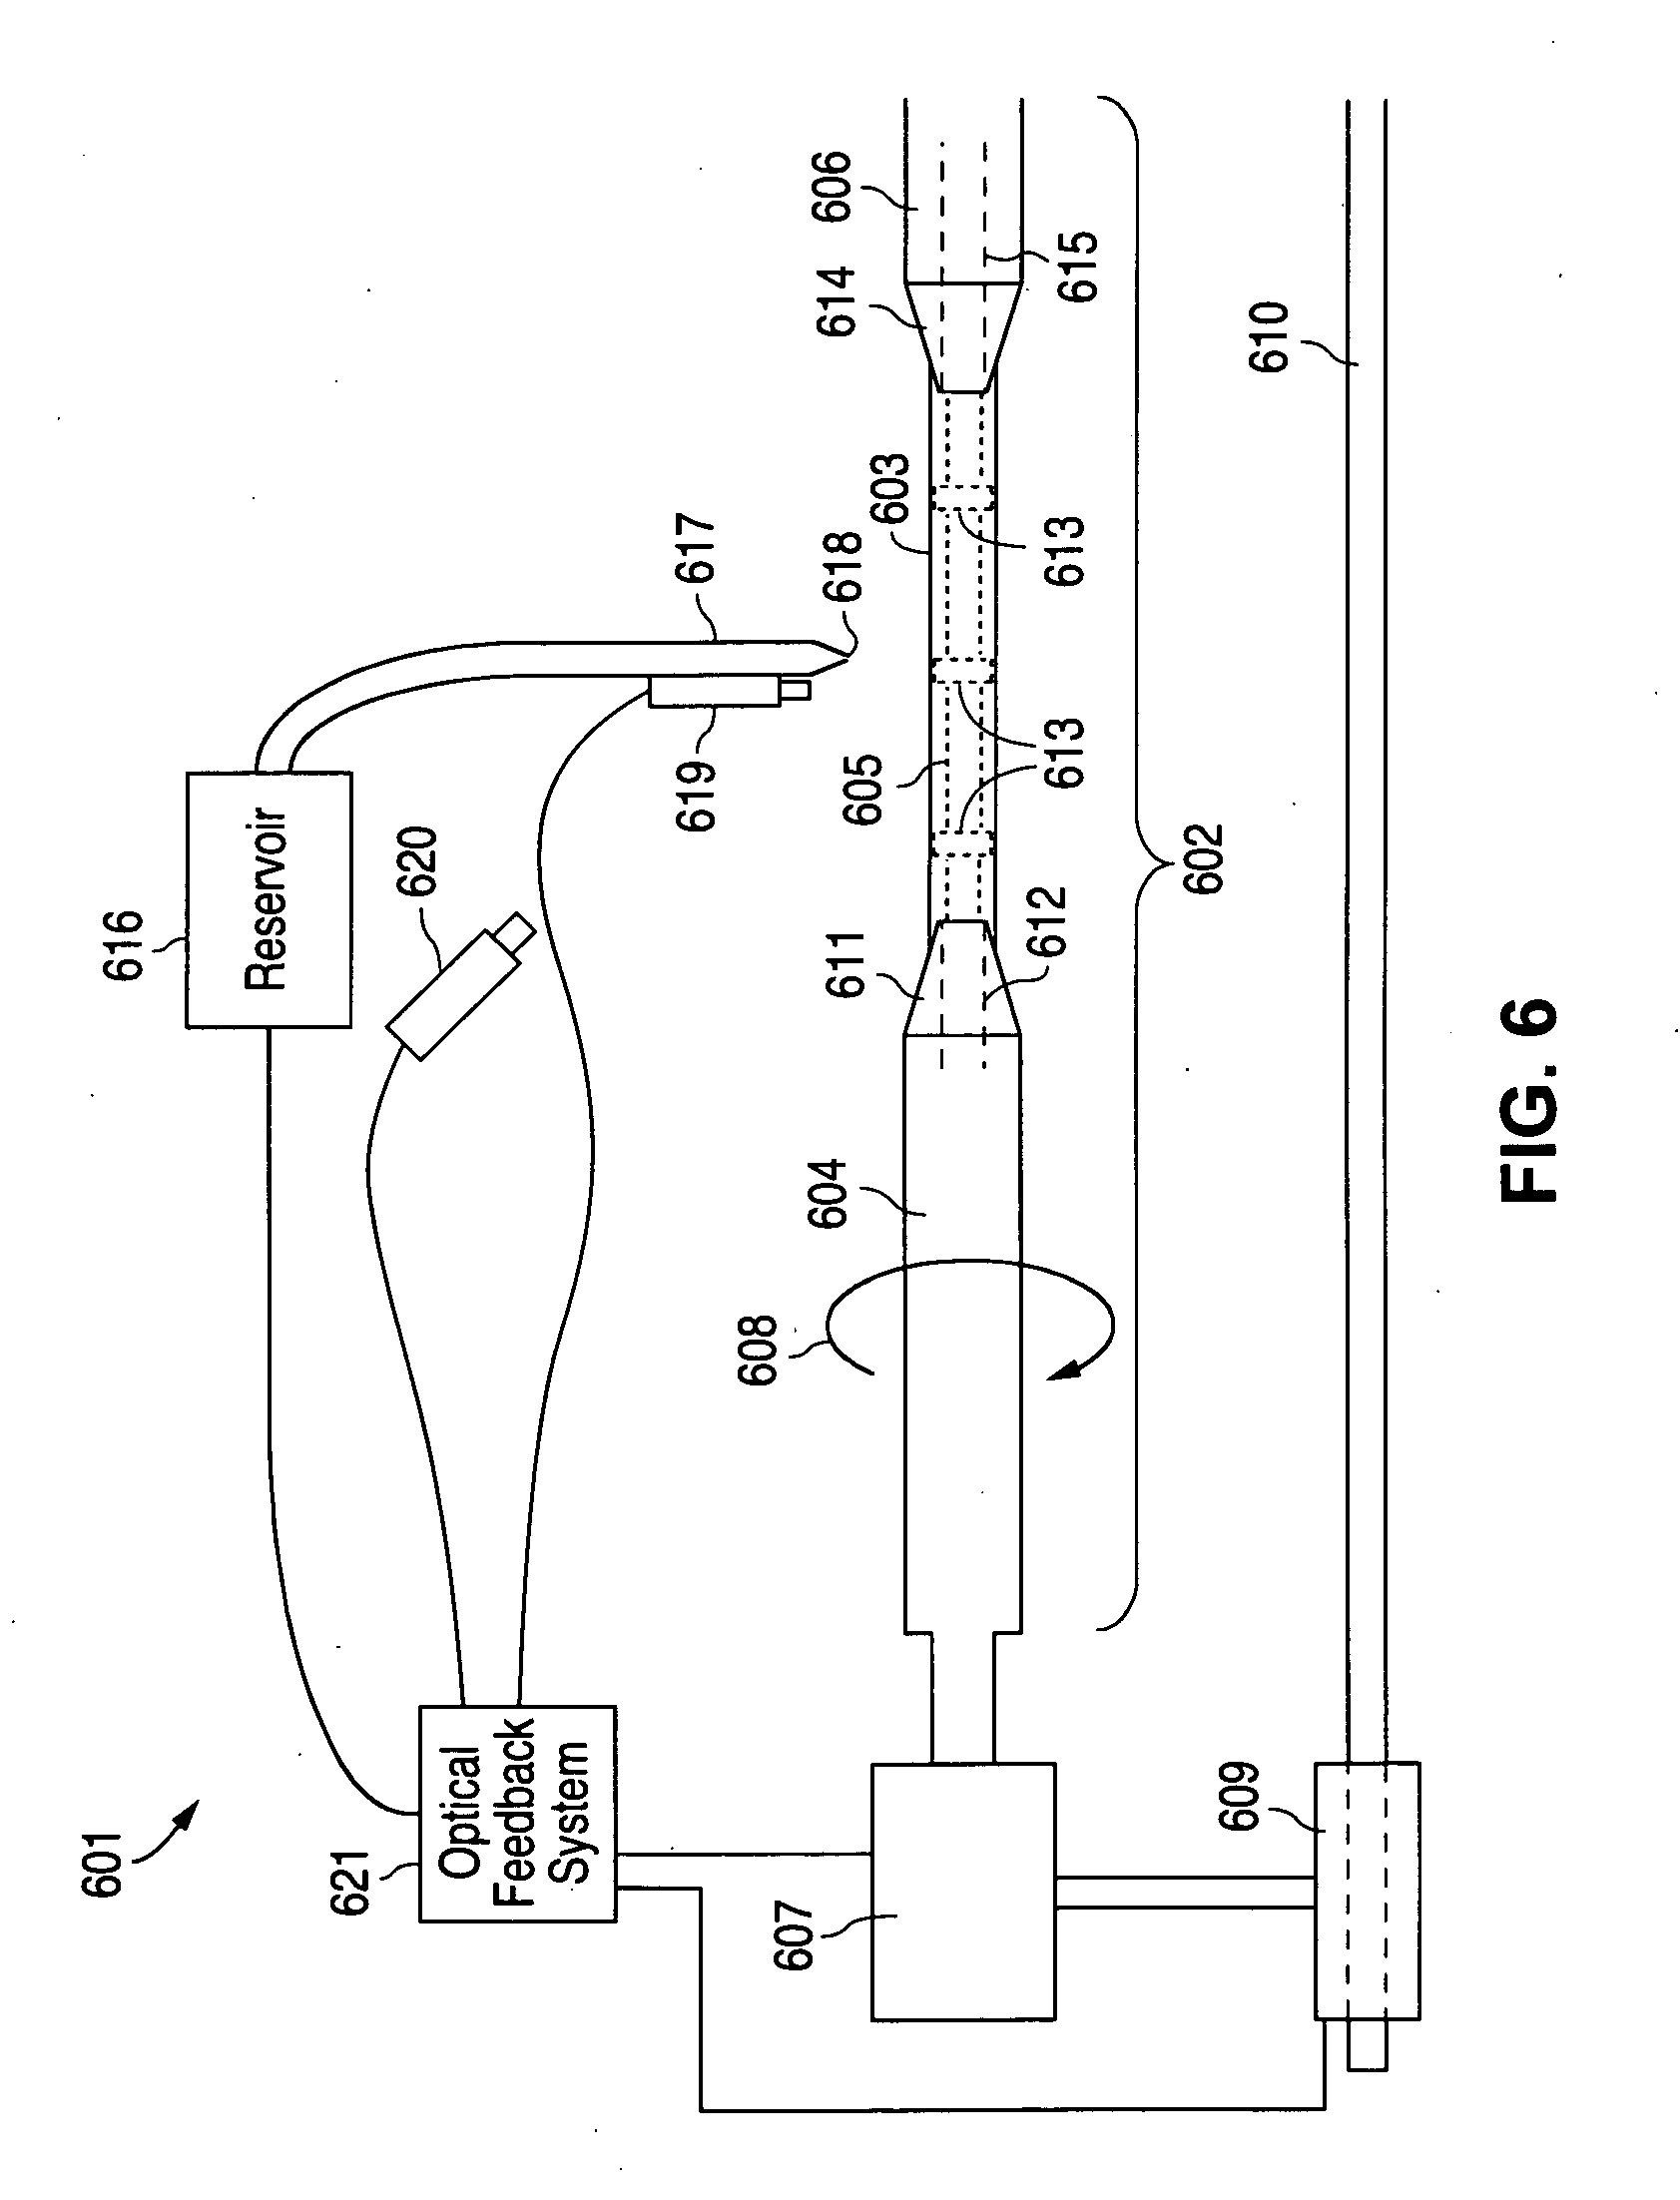 Compositions for medical devices containing agent combinations in controlled volumes